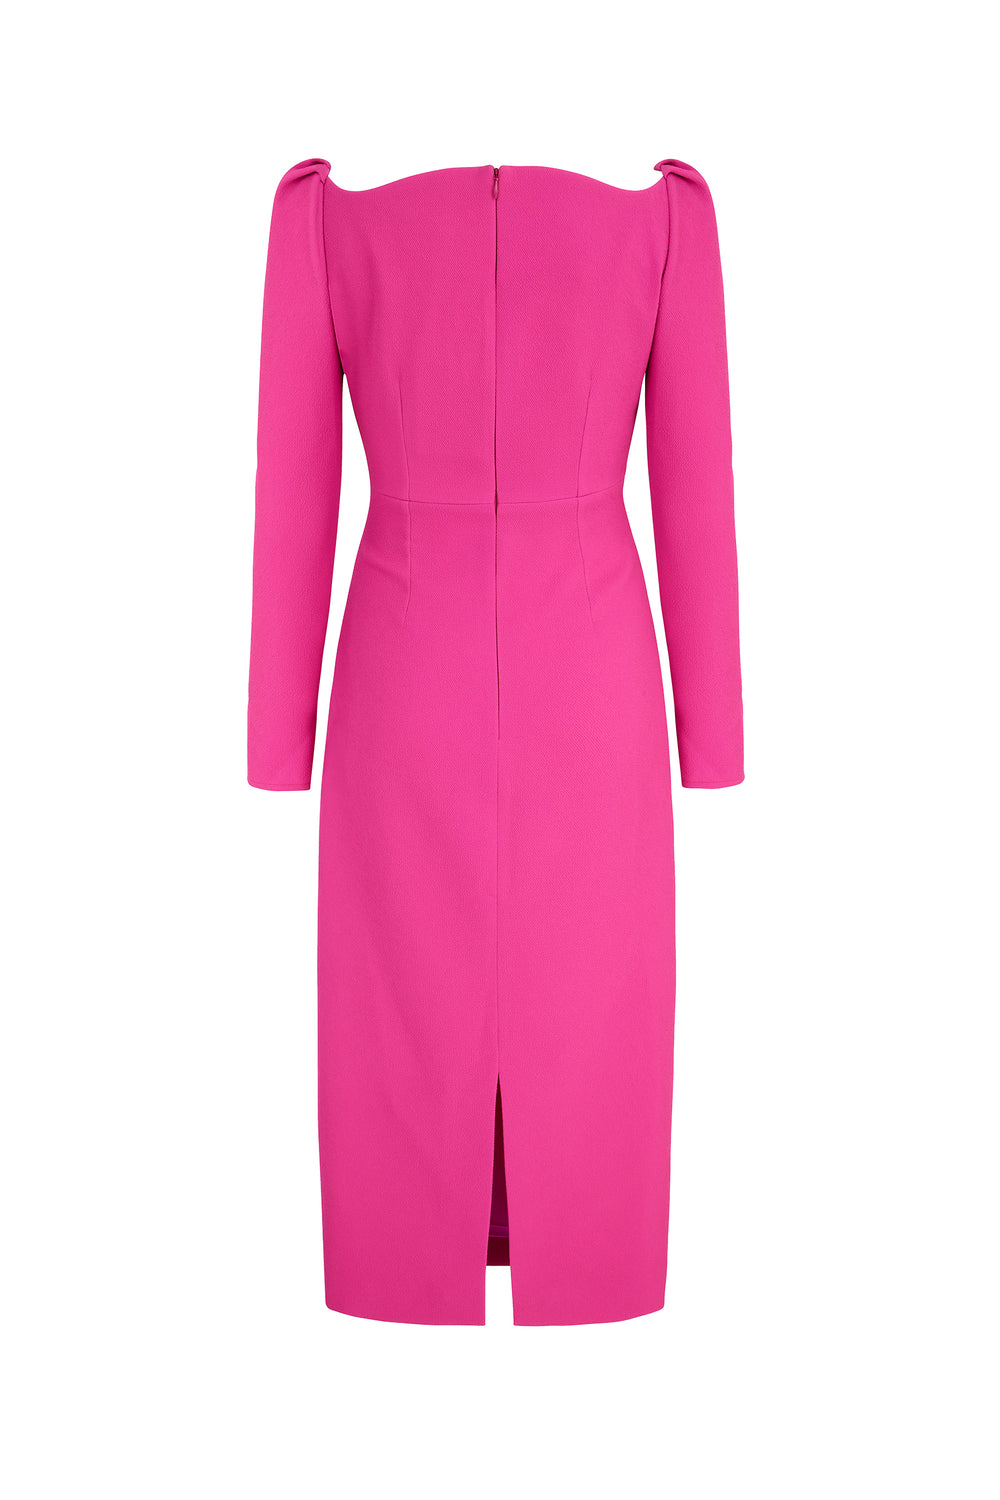 Halley Dress | Hot Stretch London Pink | Suzannah Crepe